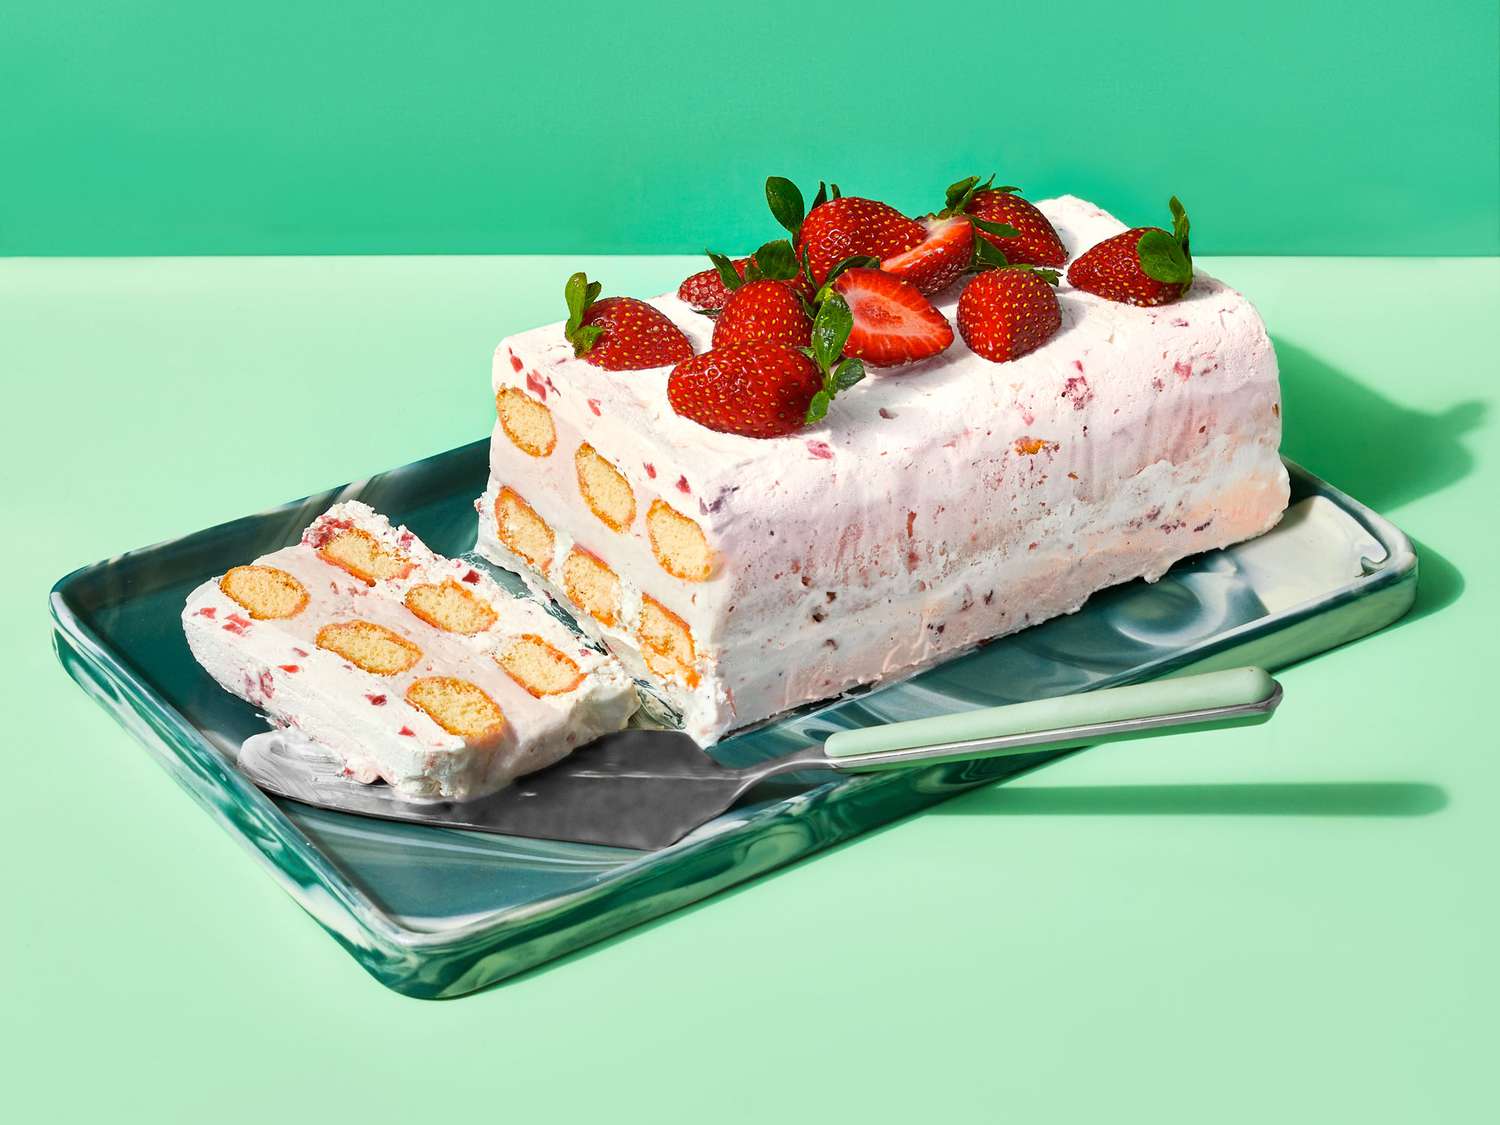 Delicious Desserts Perfect for Peak Summer | Real Simple